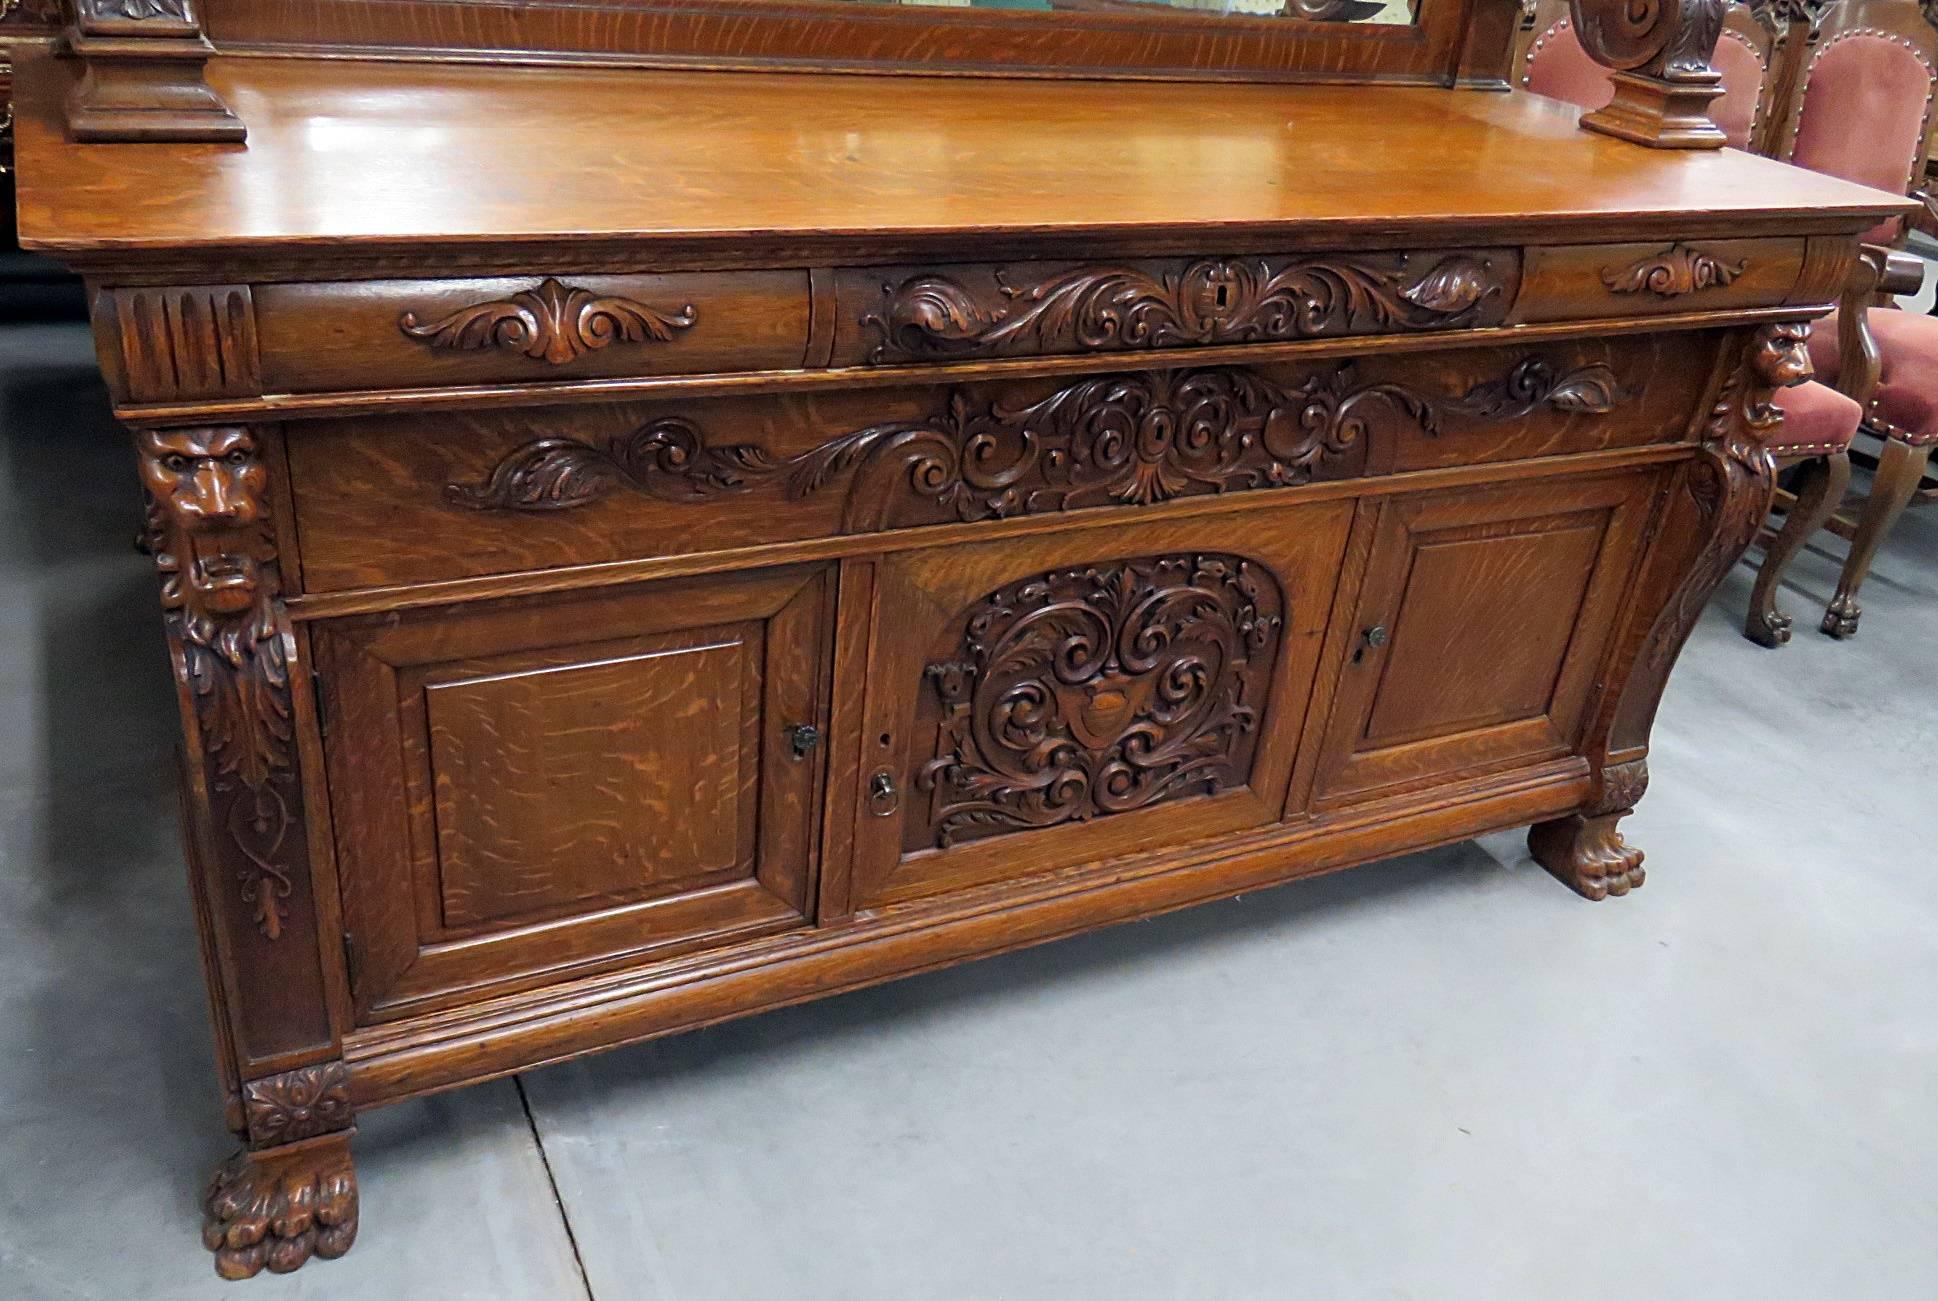 Horner style sideboard with four drawers over three doors. The top drawers are lined.